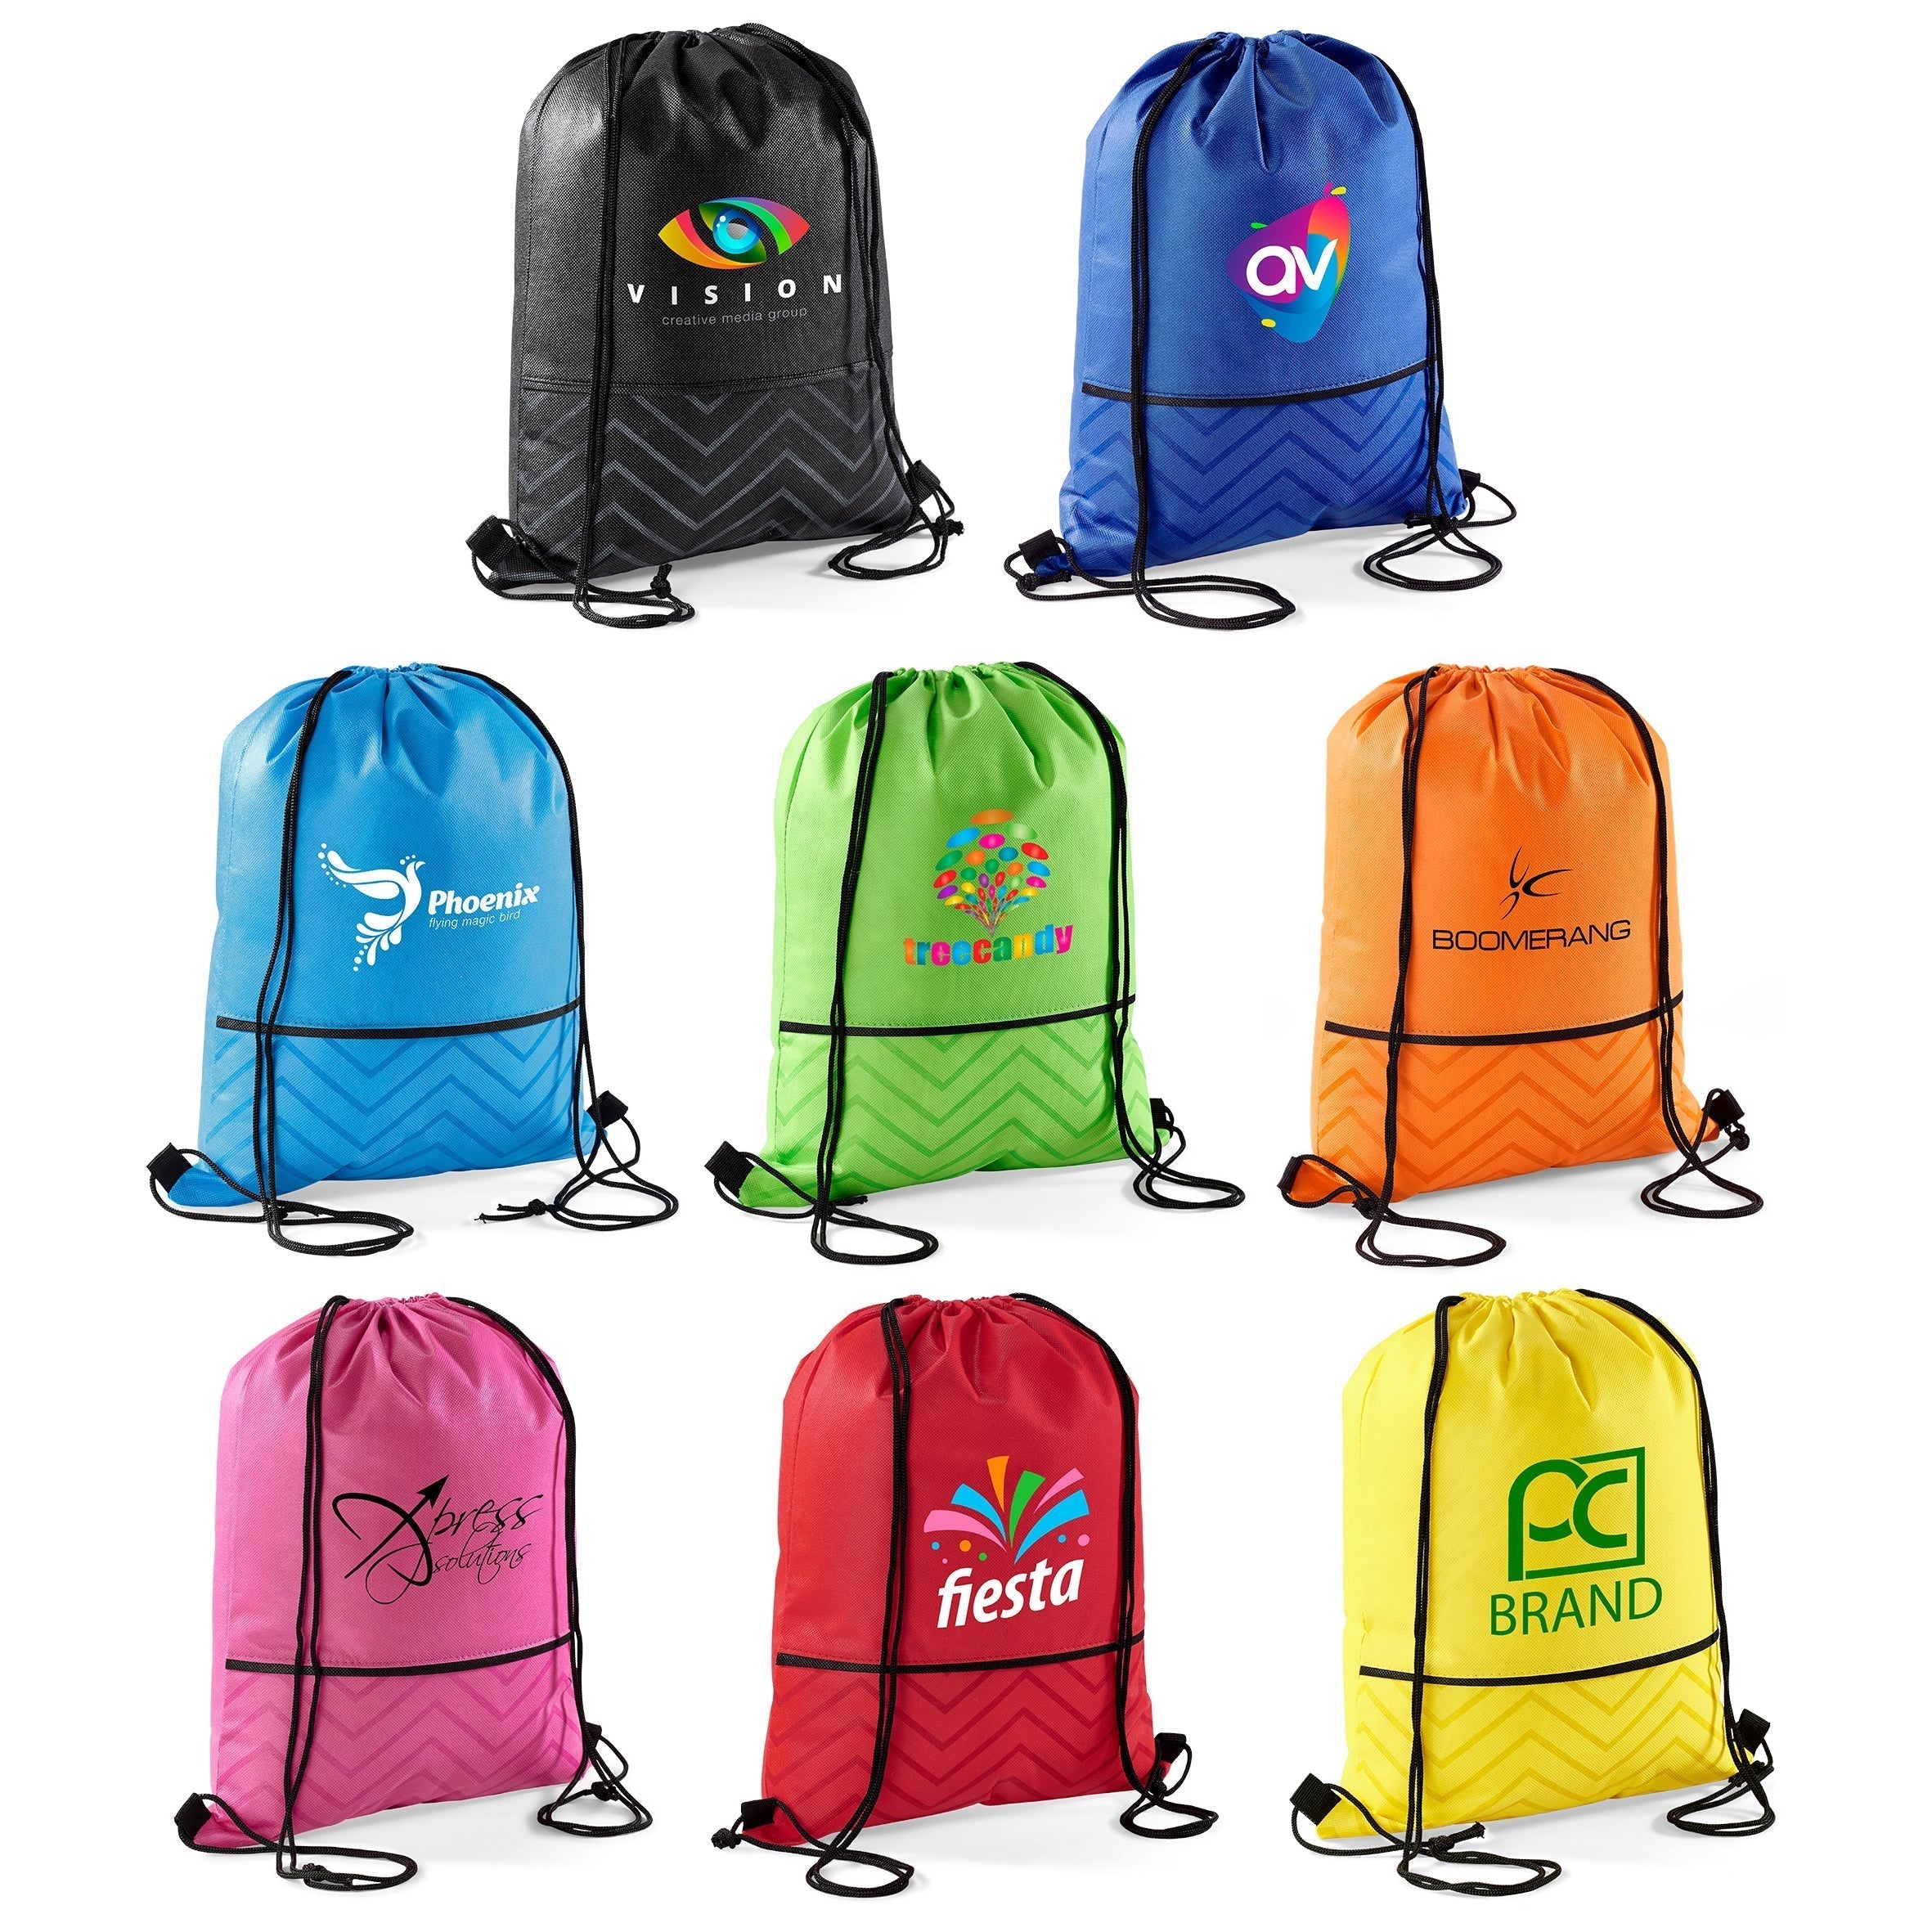 Promotional Products: Oregon Backpack | Minuteman Press